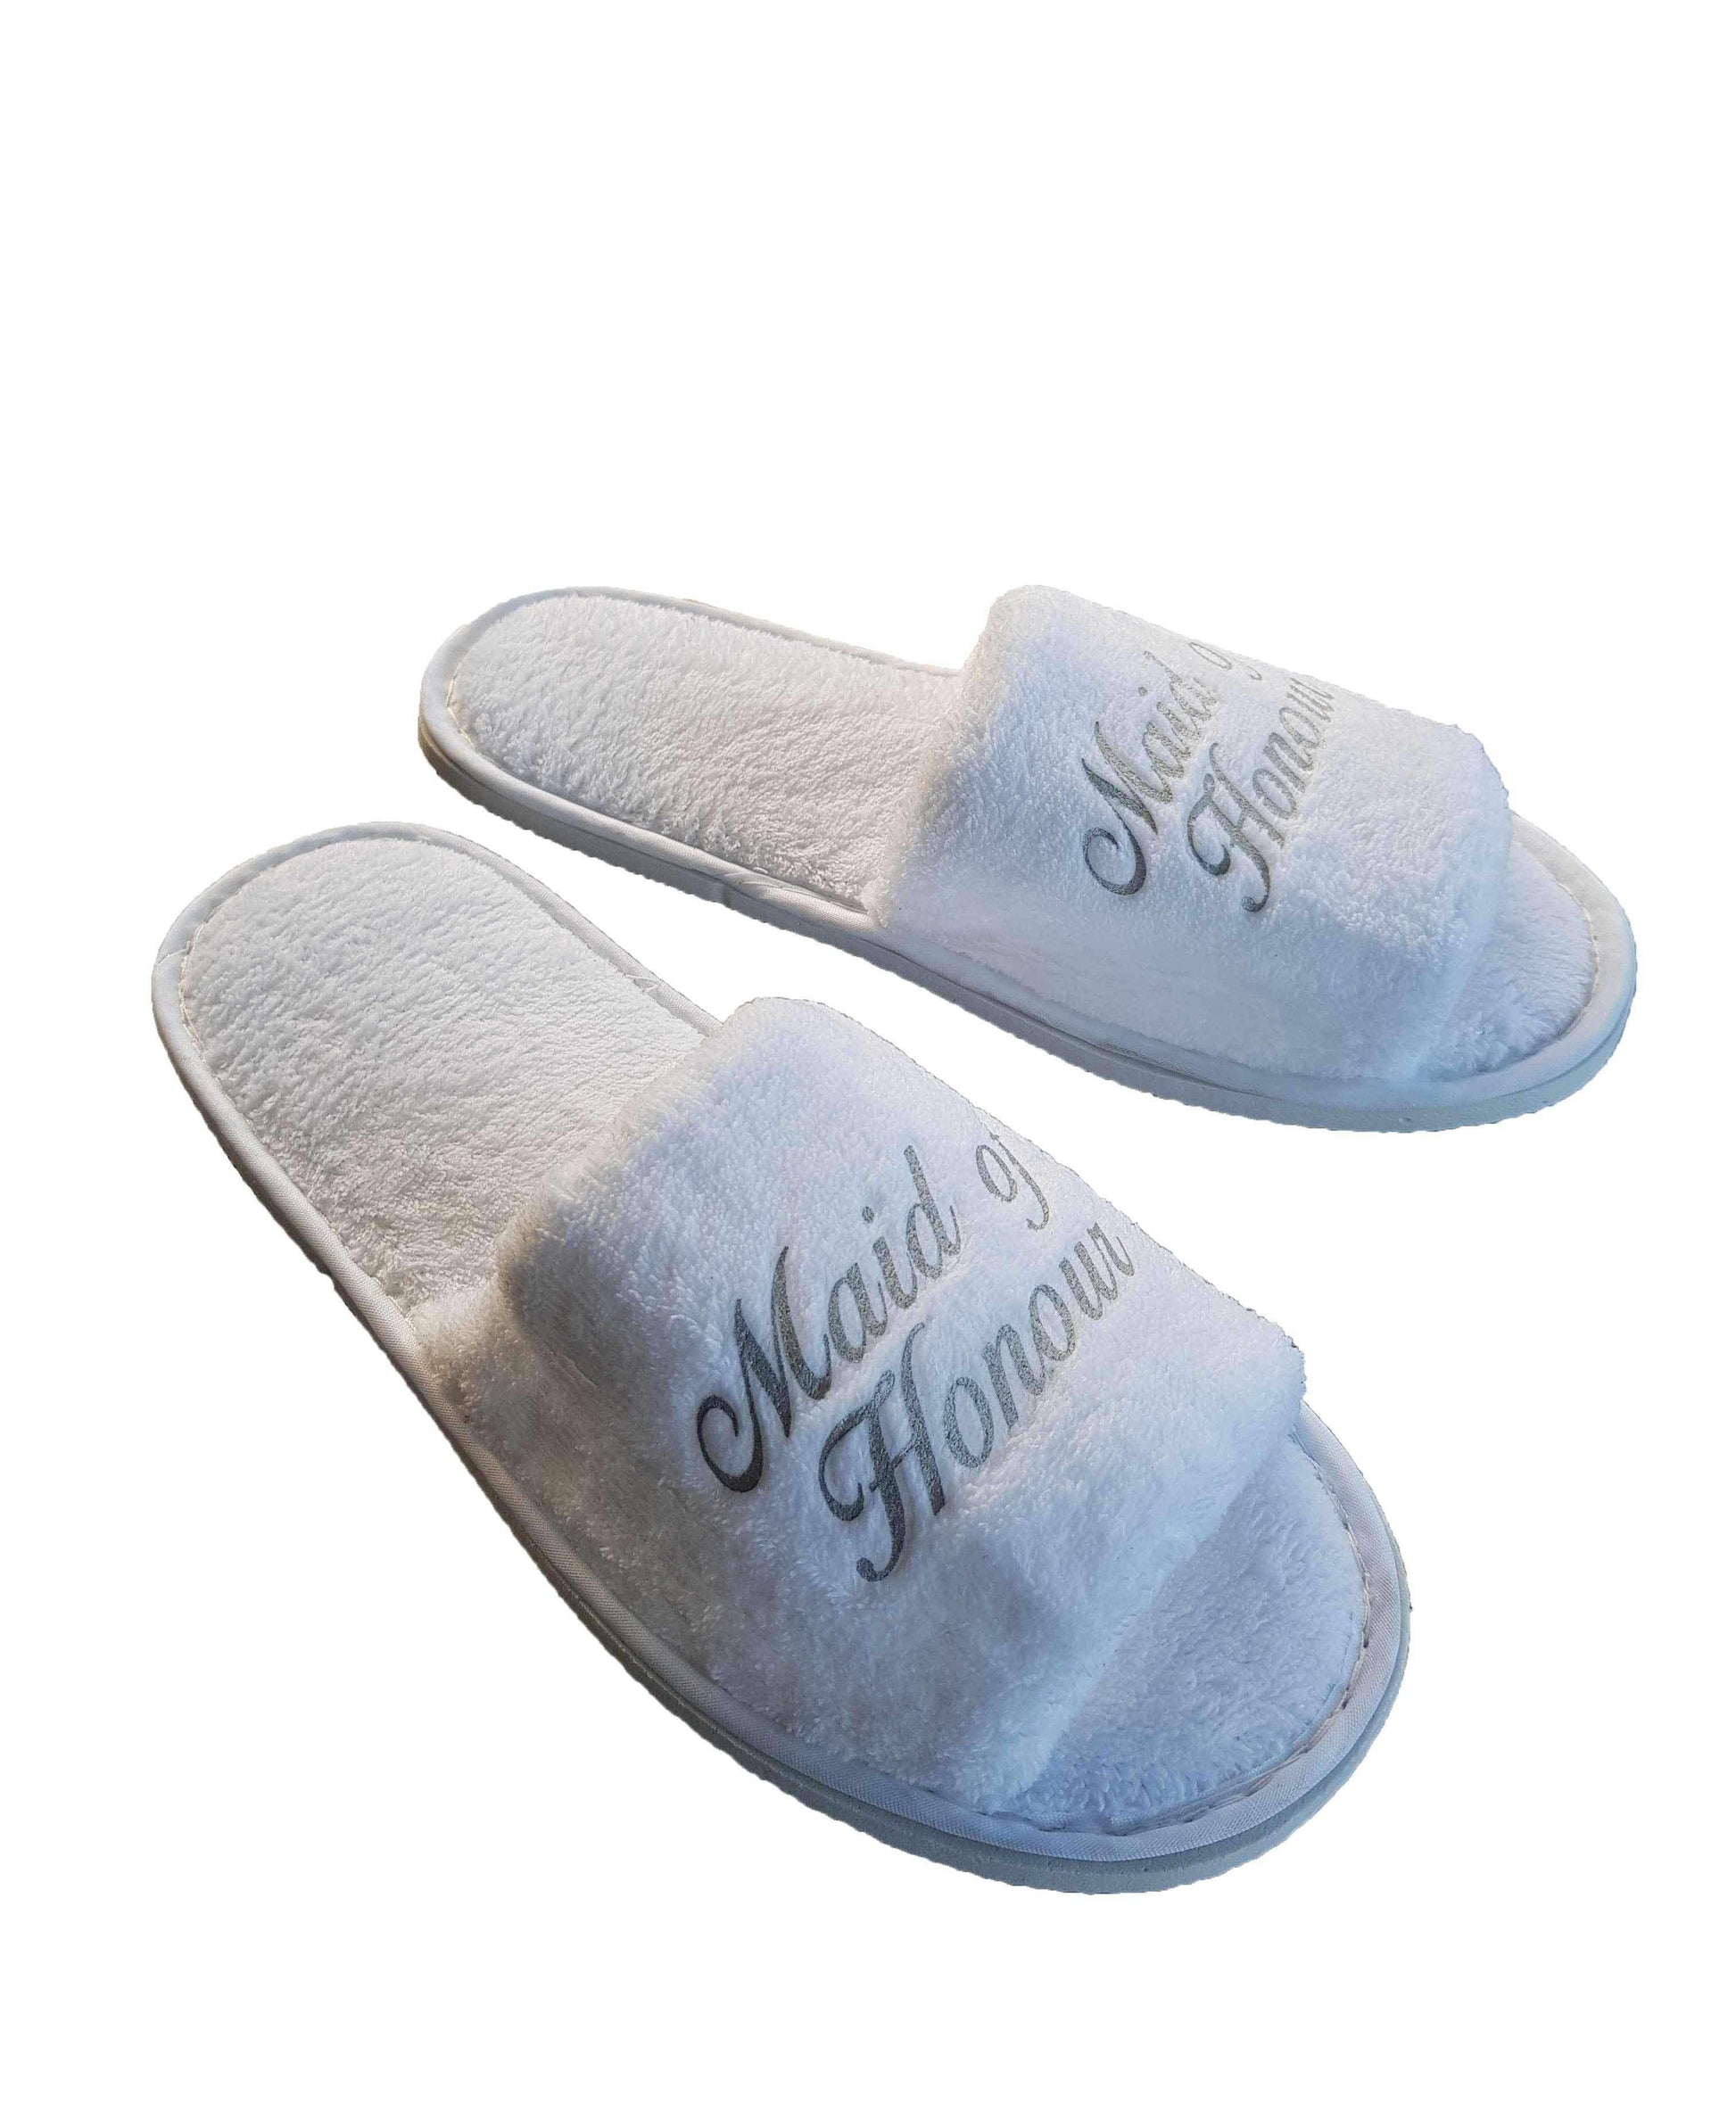 Maid of Honour Slippers - Get Spliced